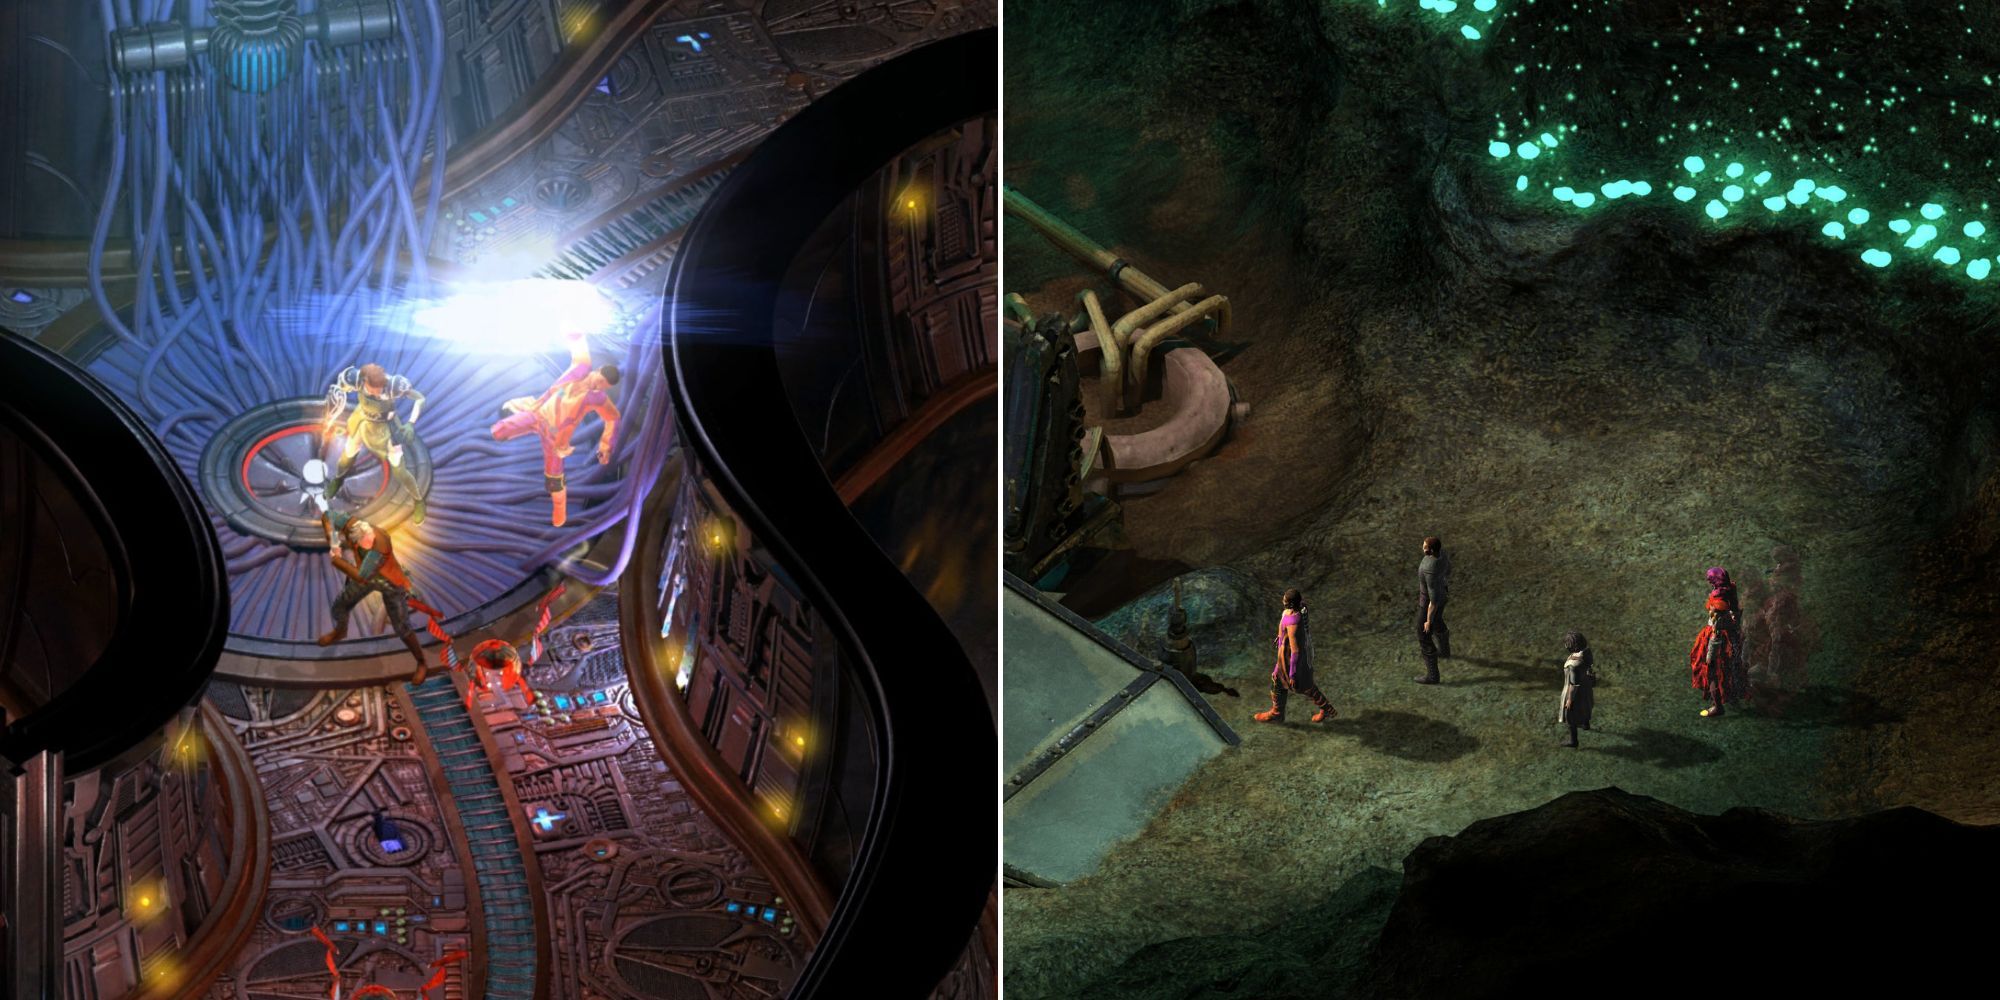 Tides of Numenera split image. Gameplay and combat in featured photos.